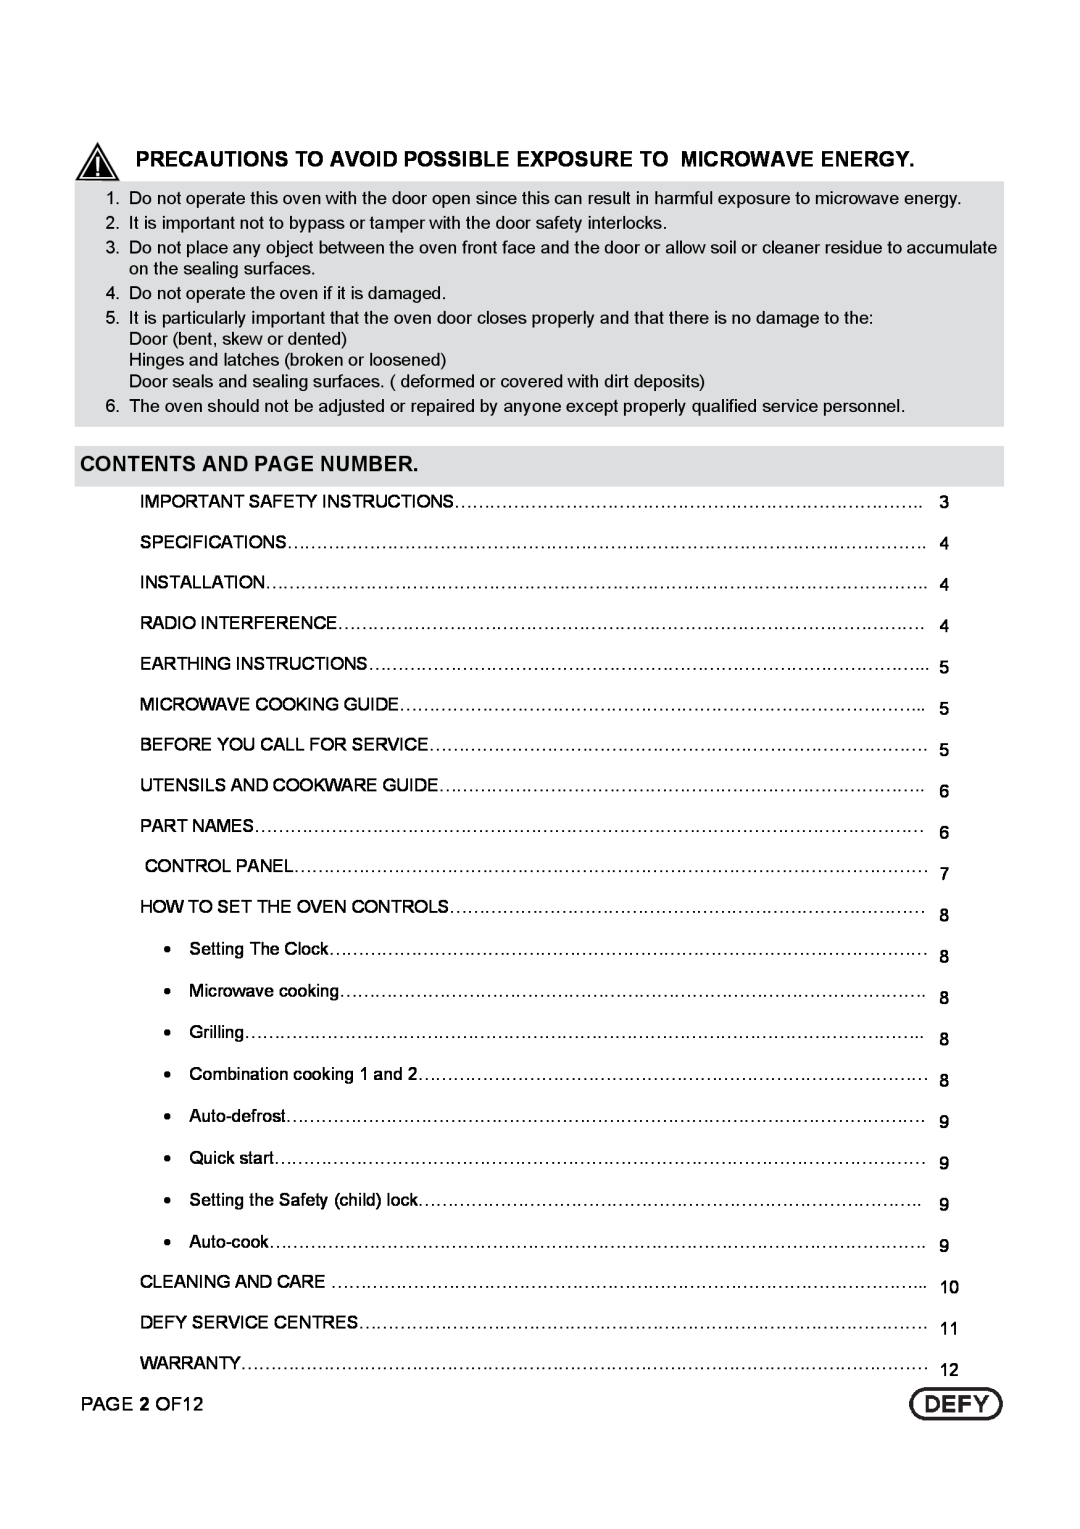 Defy Appliances DMO 343 owner manual Contents And Page Number, PAGE 2 OF12 